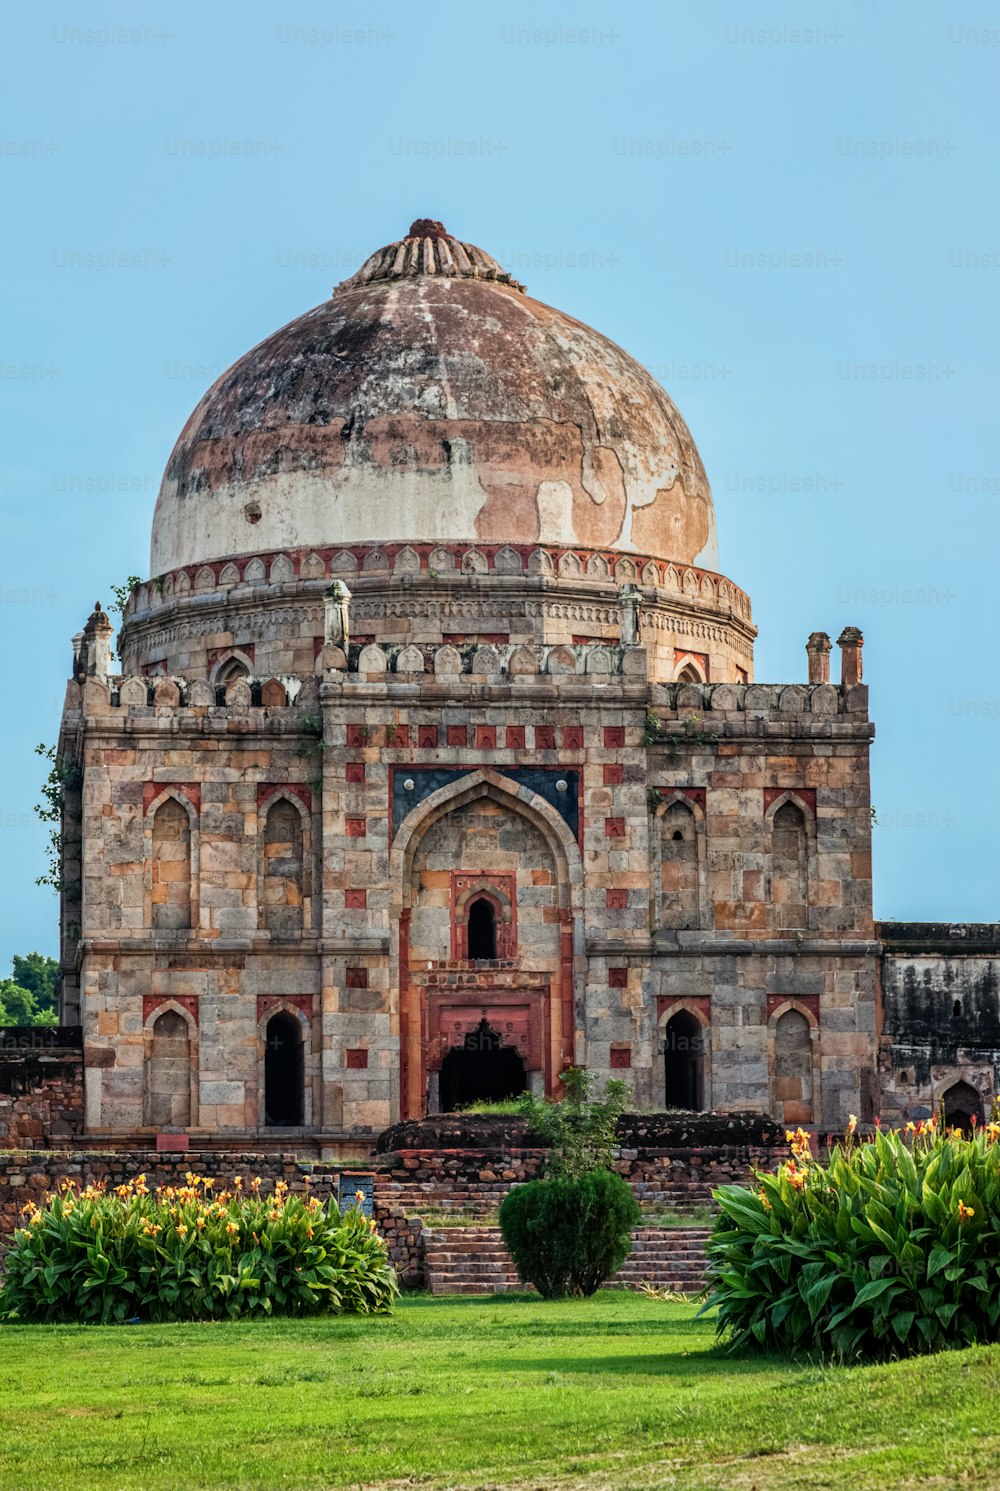 Sheesh Gumbad - islamic tomb from the last lineage of the Lodhi Dynasty. It is situated in Lodi Gardens city park in Delhi, India